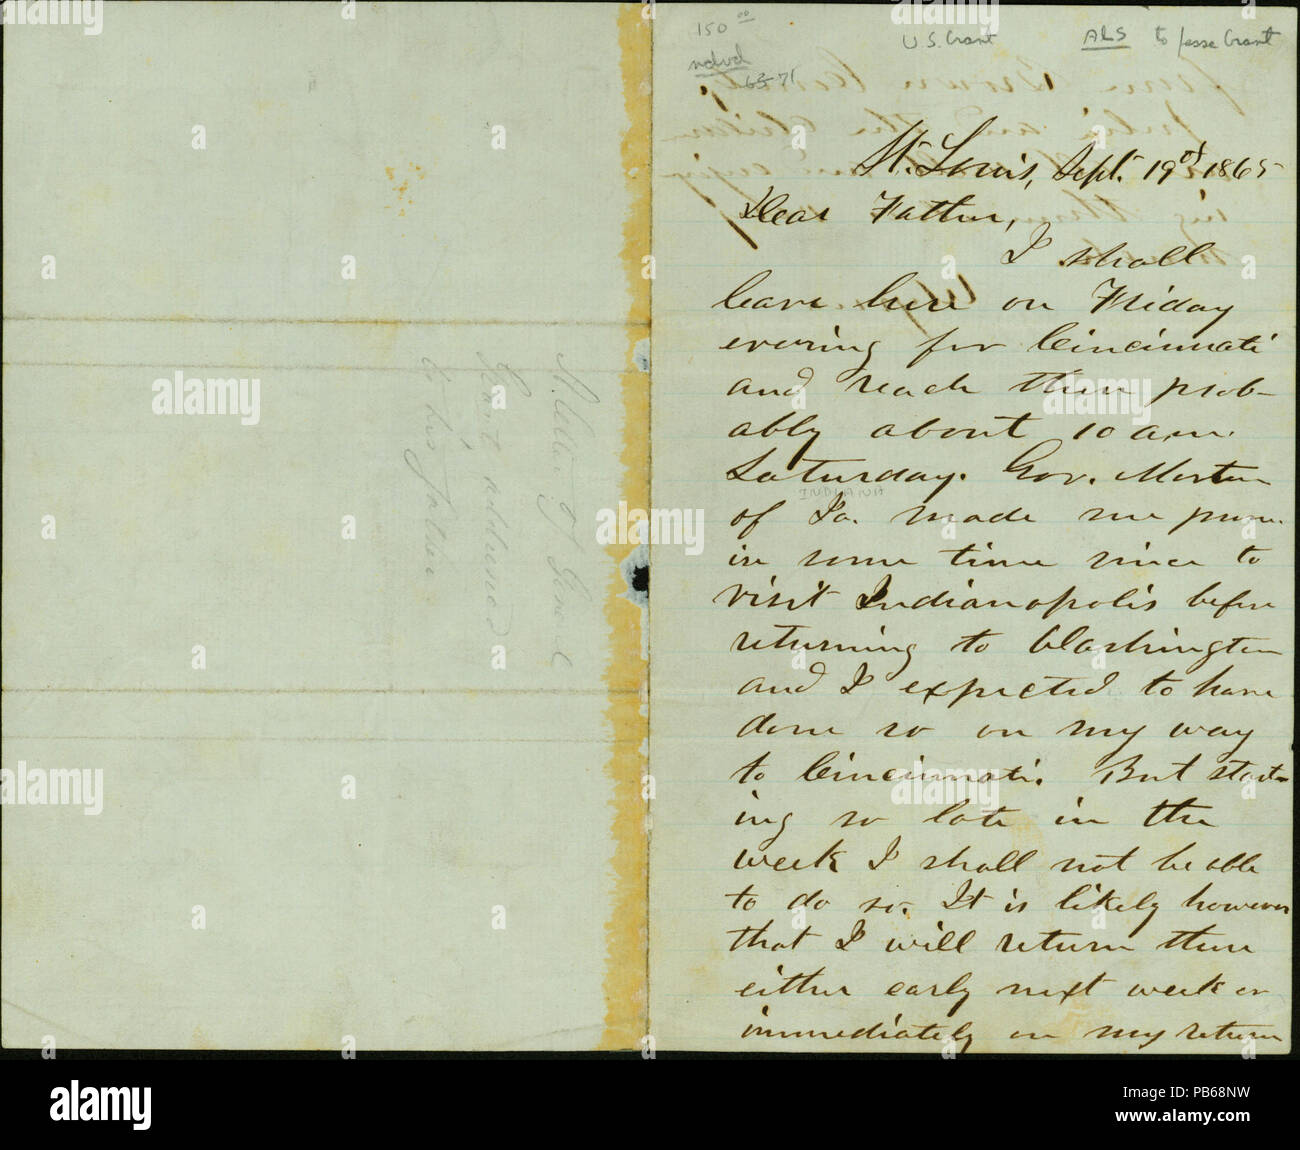 913 Letter signed Ulysses (U.S. Grant), St. Louis, to Father (Jesse Root Grant), September 19, 1865 Stock Photo